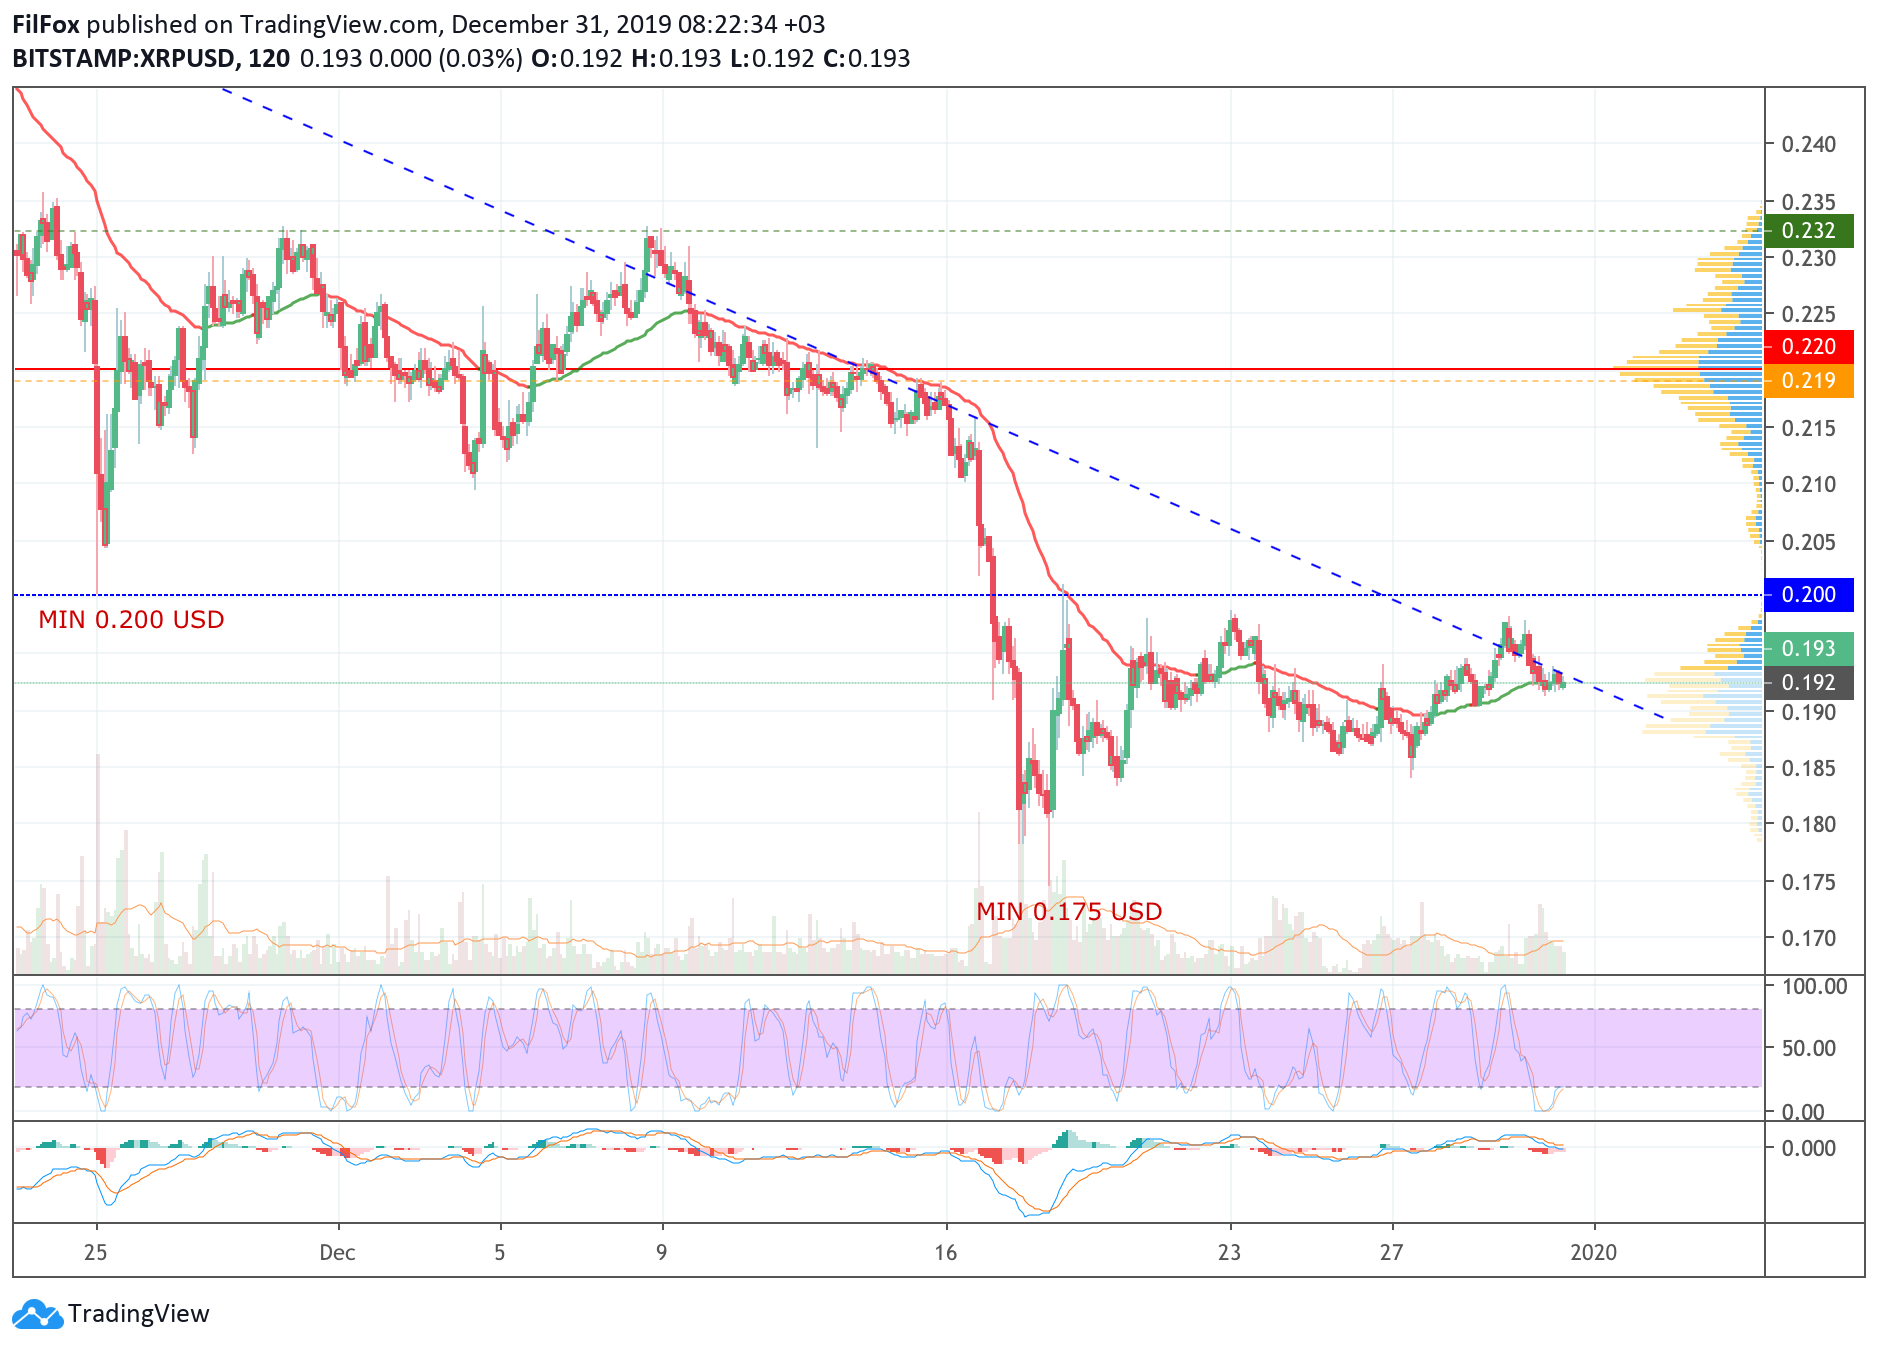 Analysis of cryptocurrency pairs BTC / USD, ETH / USD and XRP / USD as of December 31, 2019